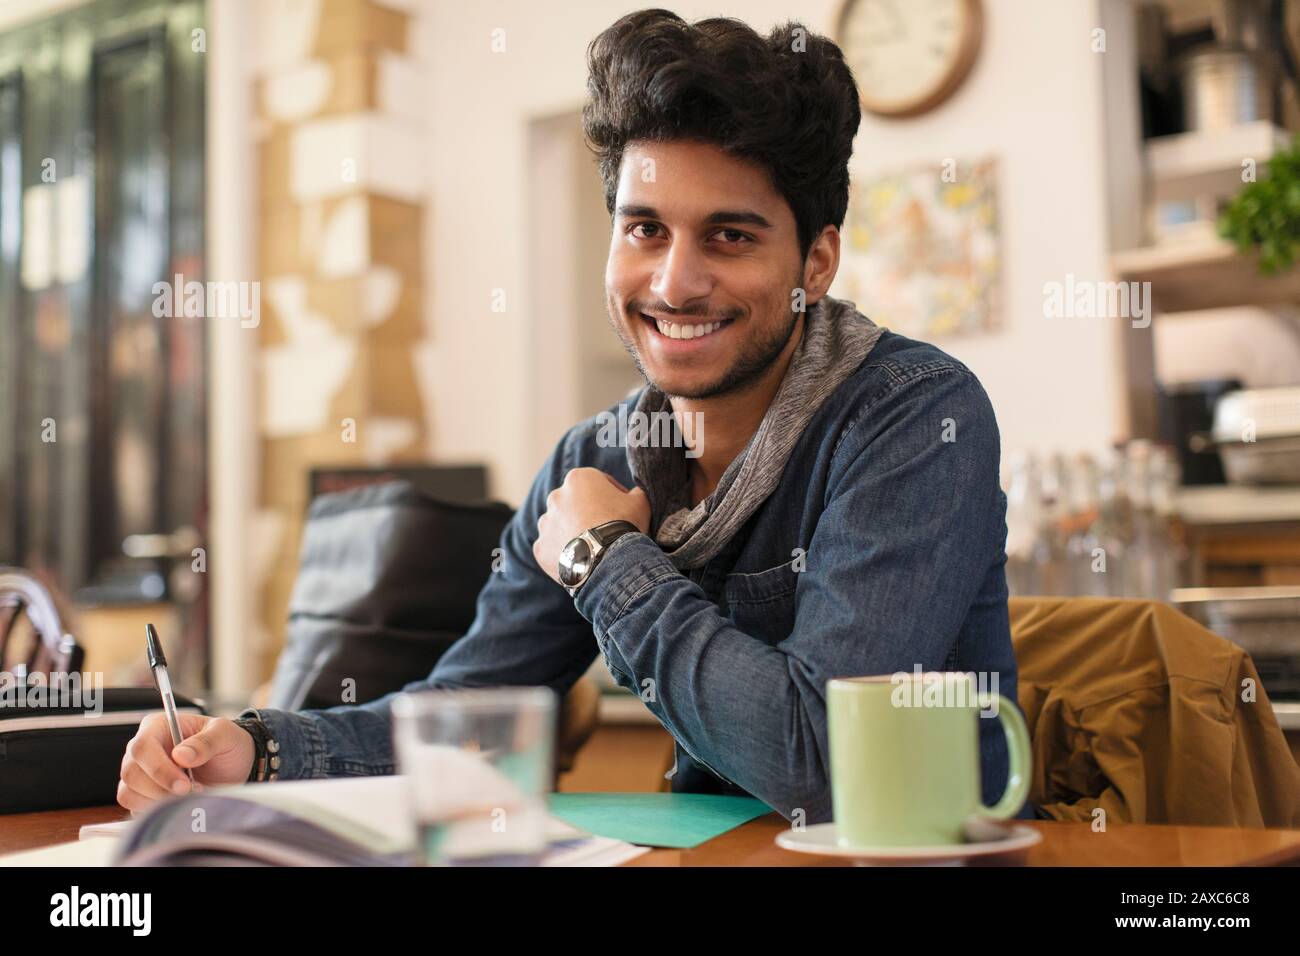 Portrait confident young male college student studying at cafe table Stock Photo